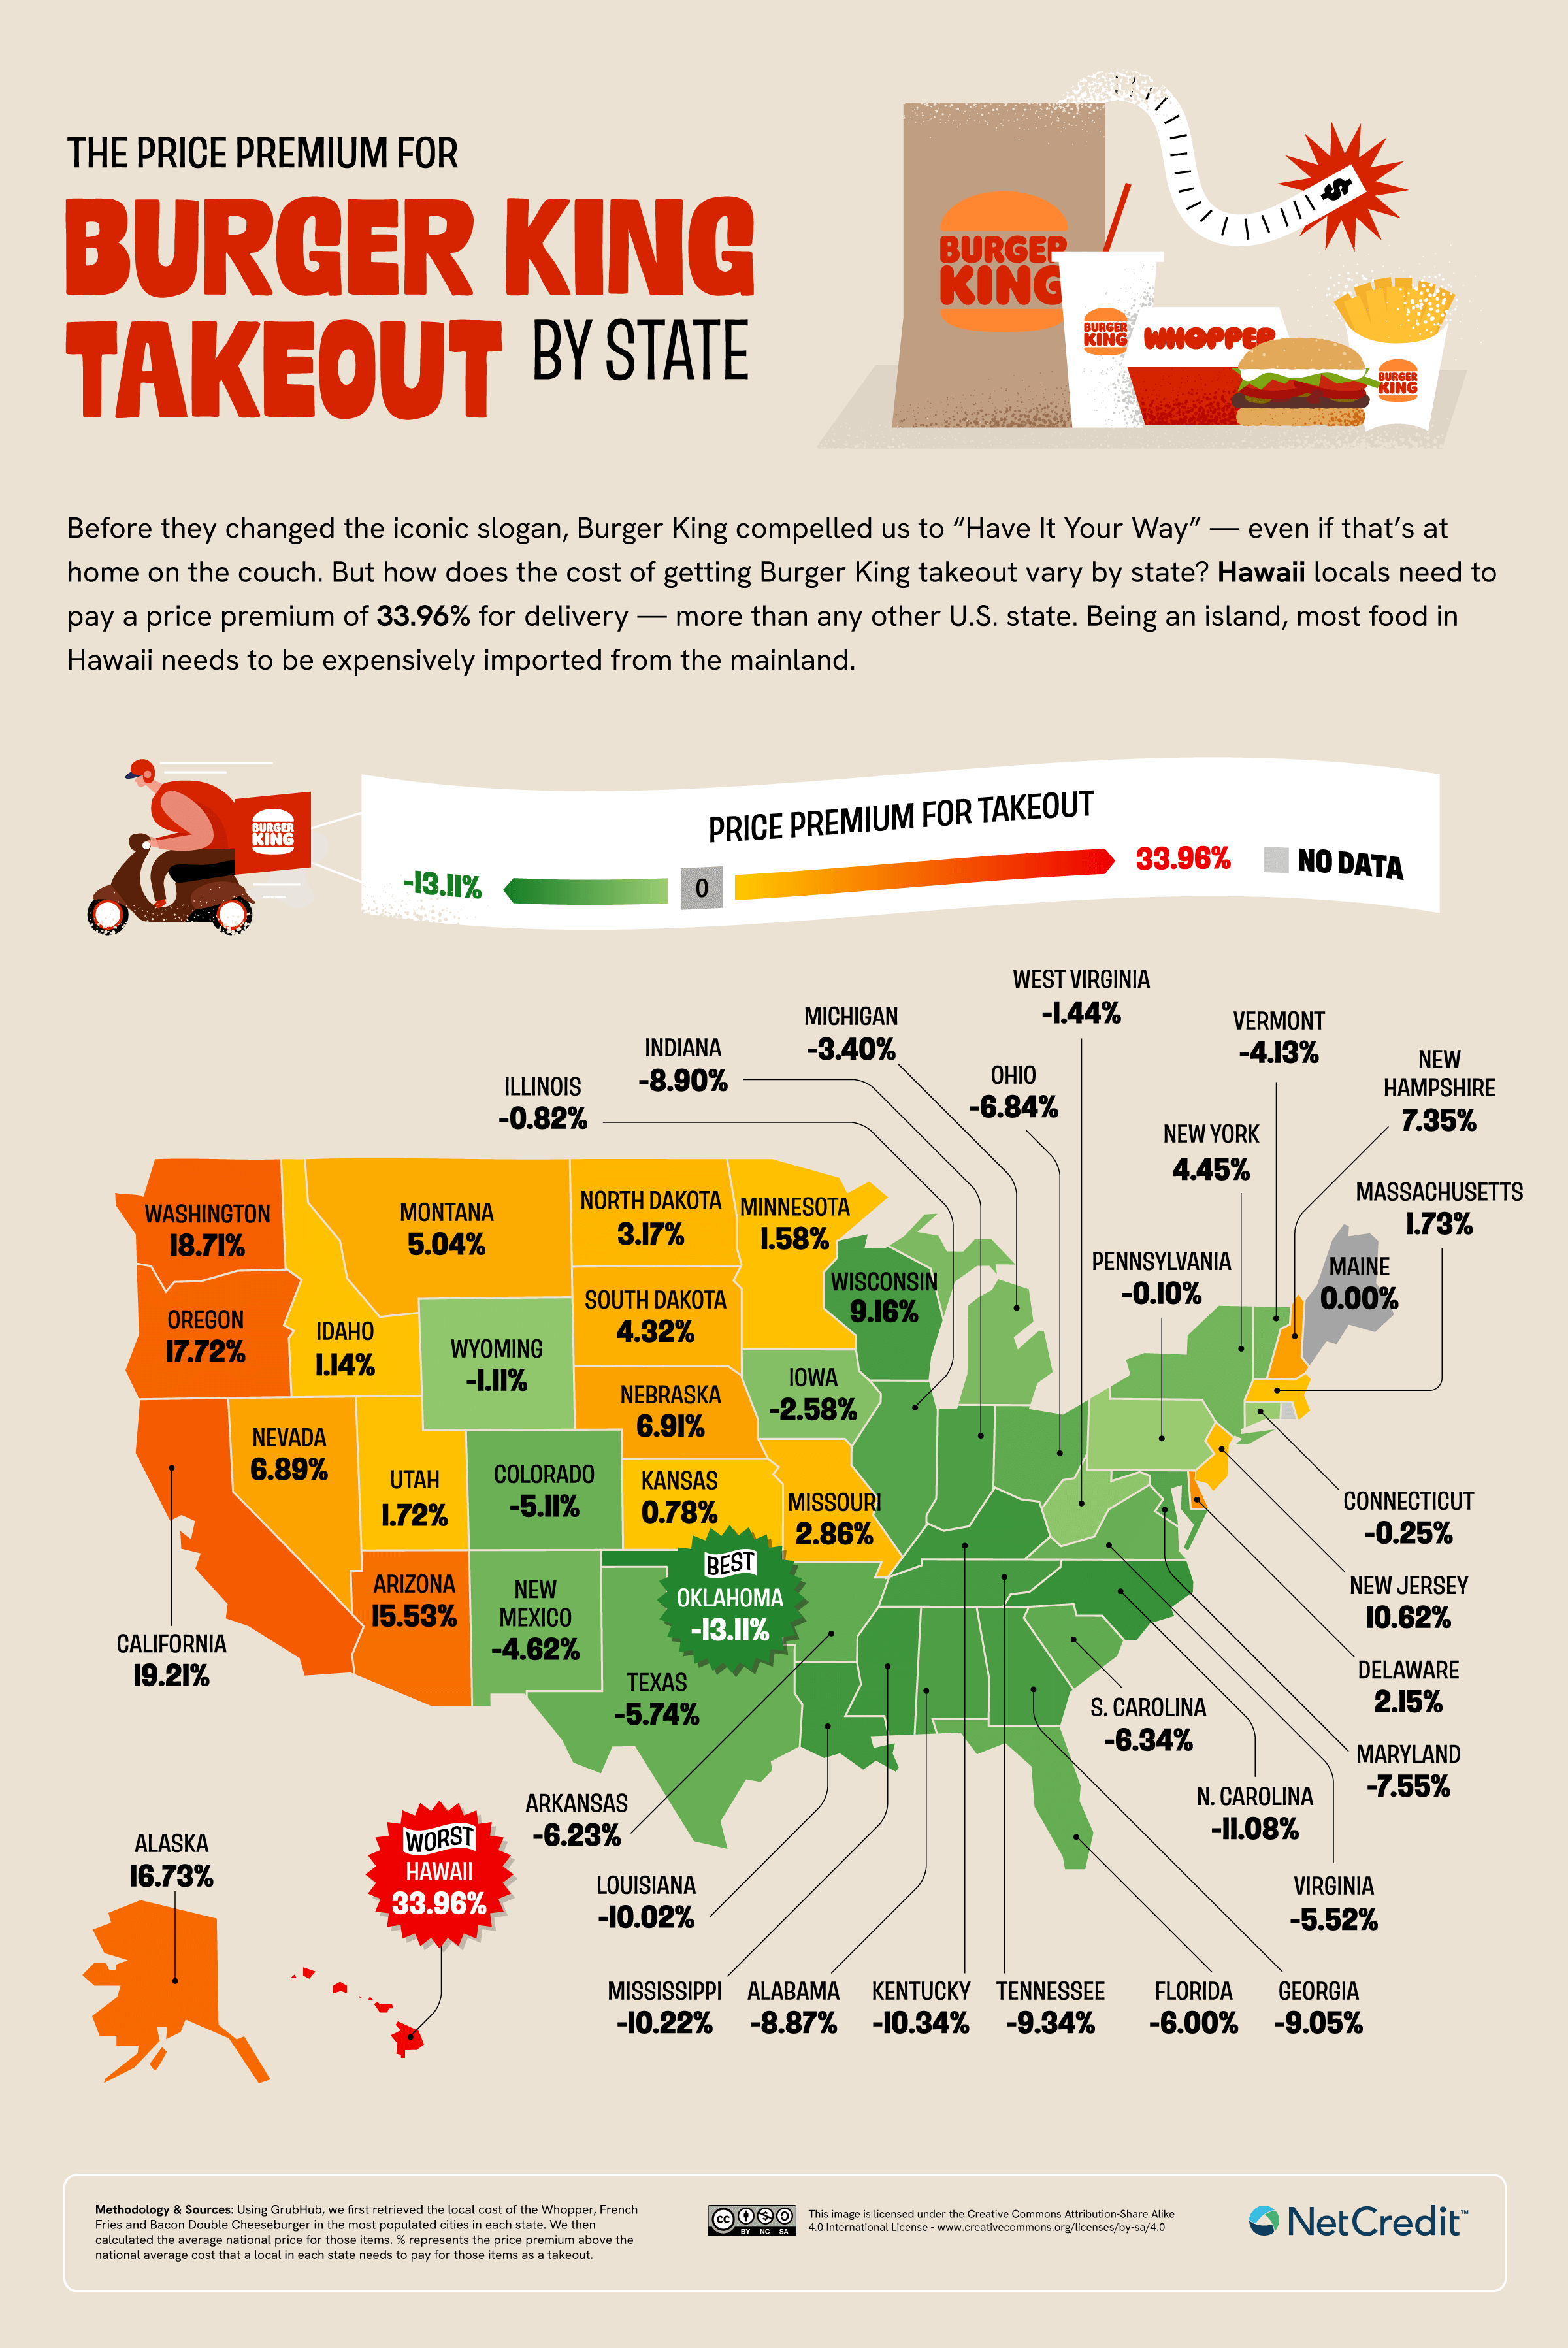 Infographic of the price premium for Burger King takeout by state.